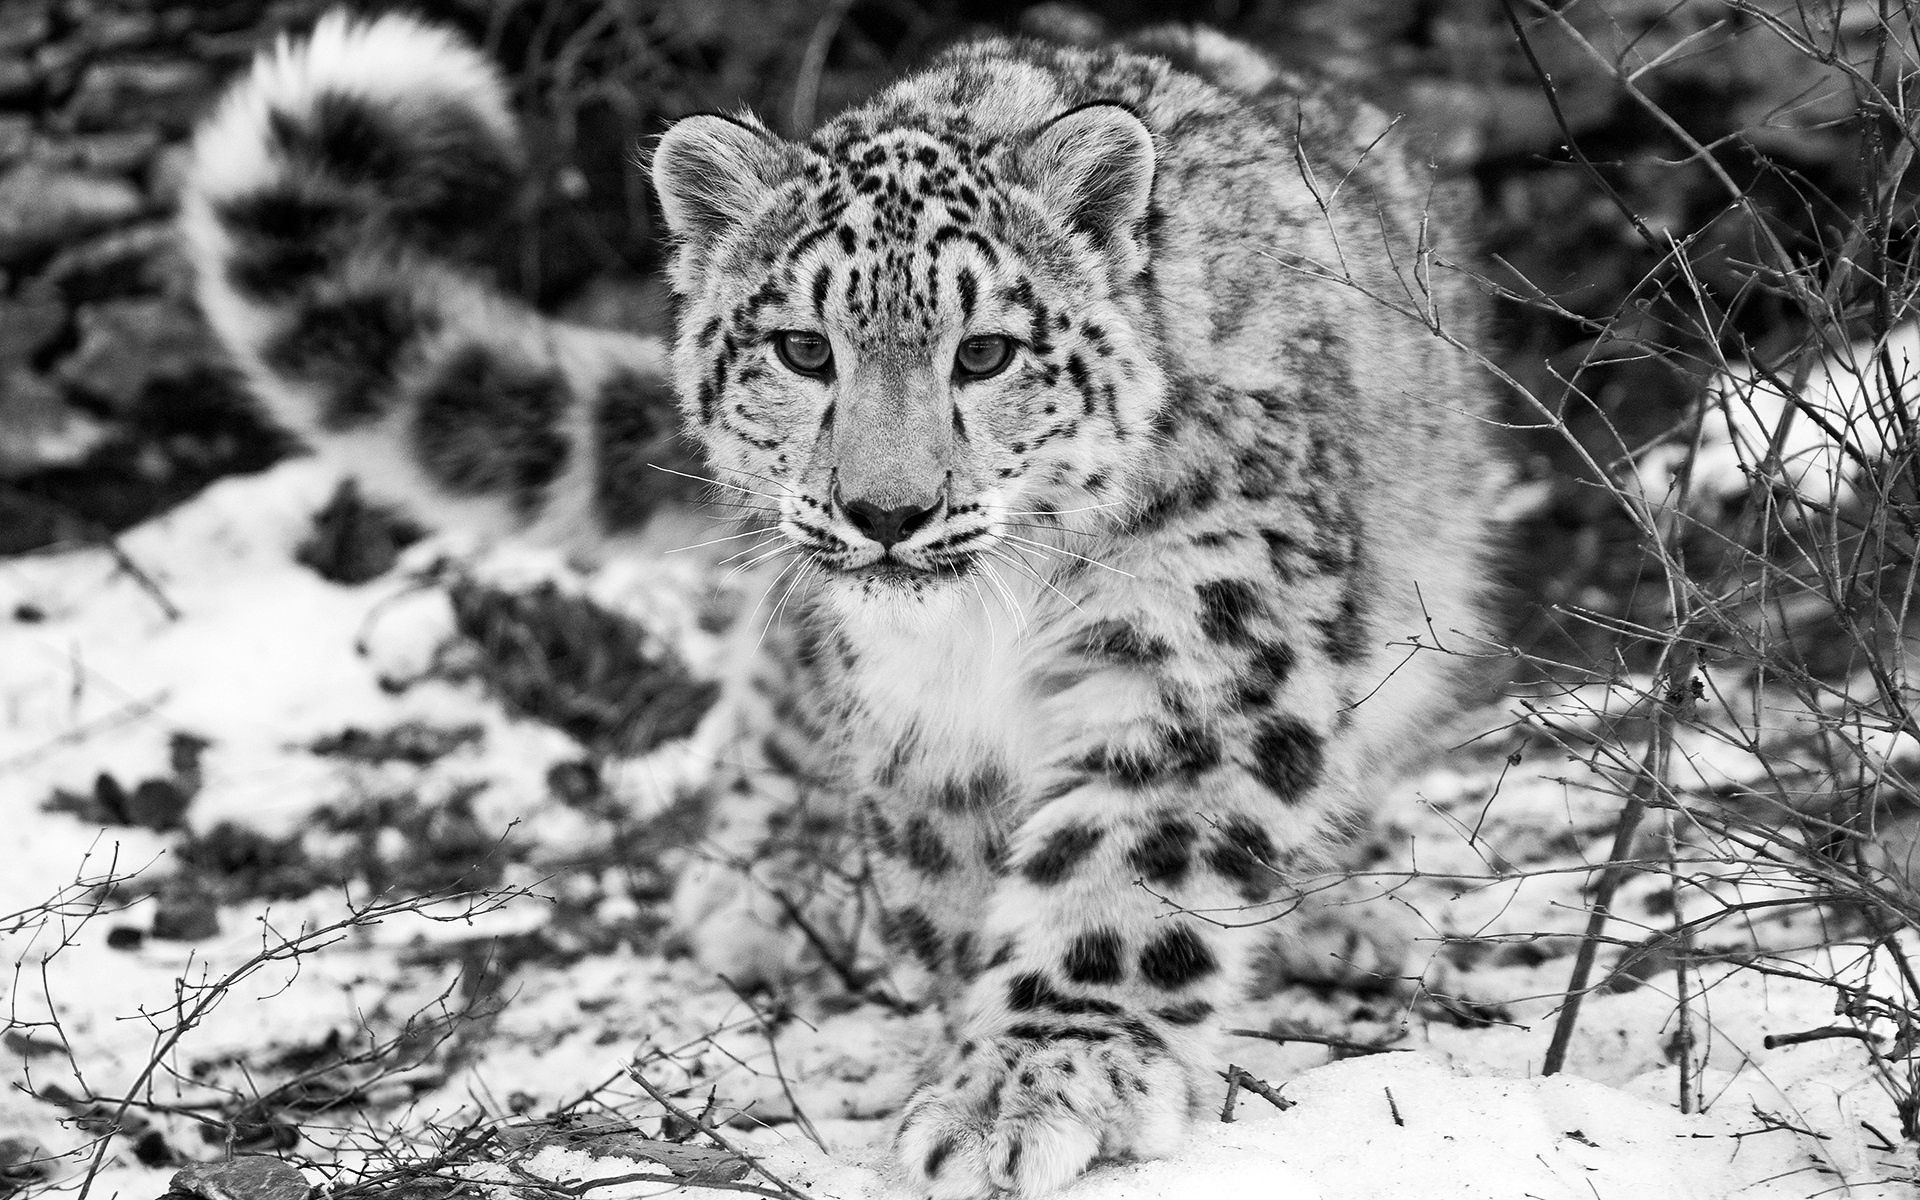 84548 download wallpaper snow leopard, animals, snow, bw, chb, hunting, hunt, mindfulness, attentiveness screensavers and pictures for free